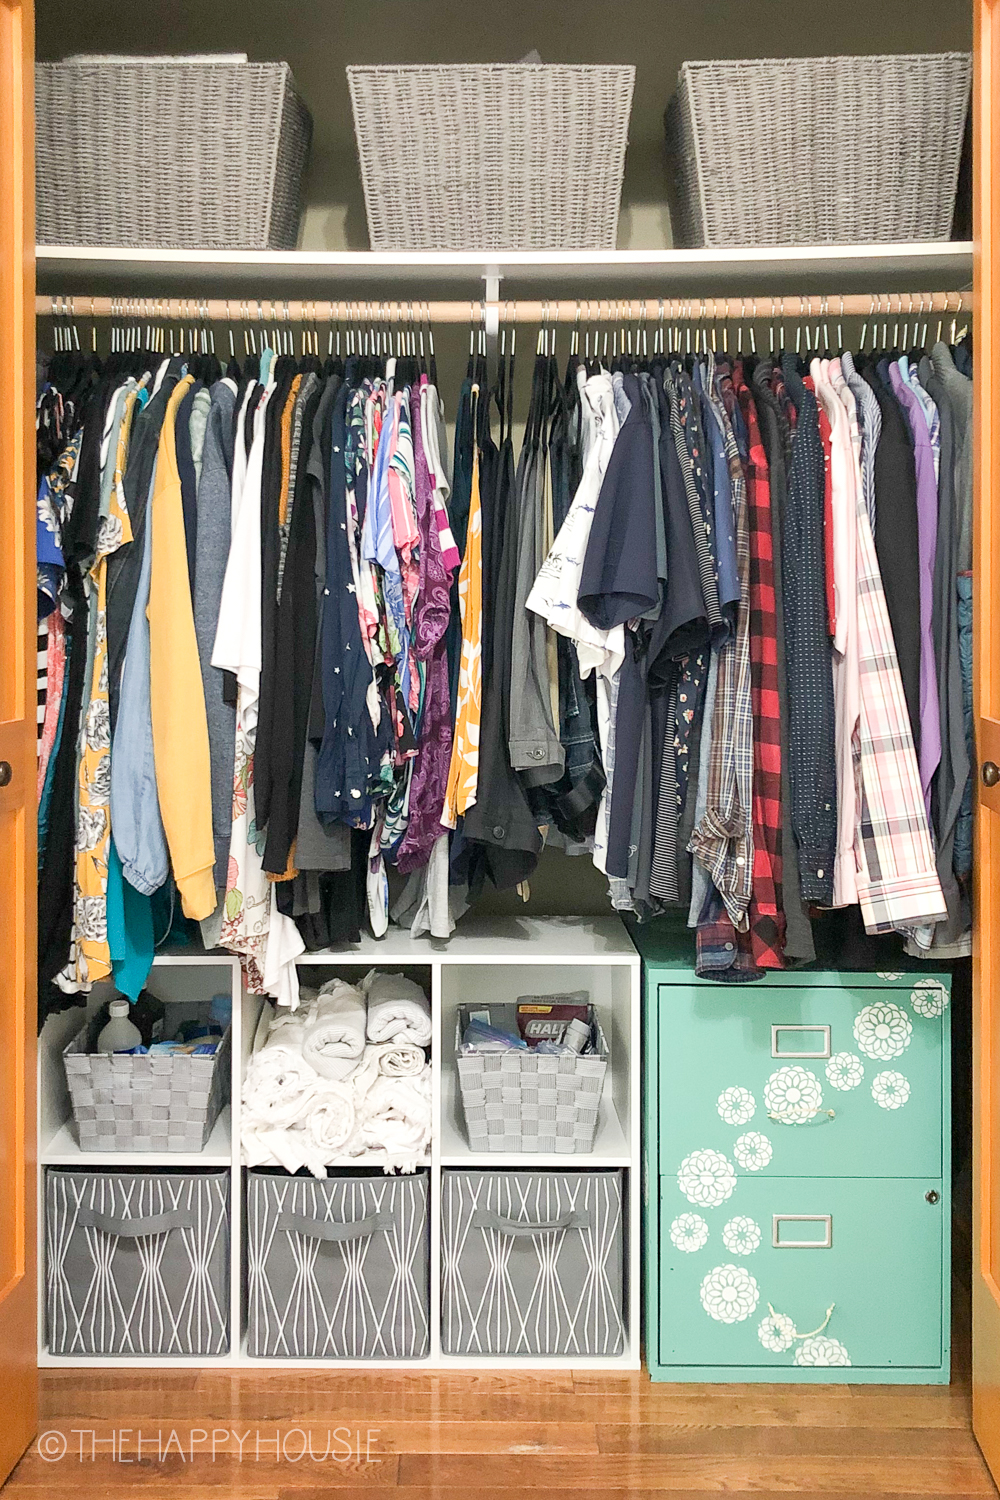 How to Organize Your Closet in 30 Minutes Flat